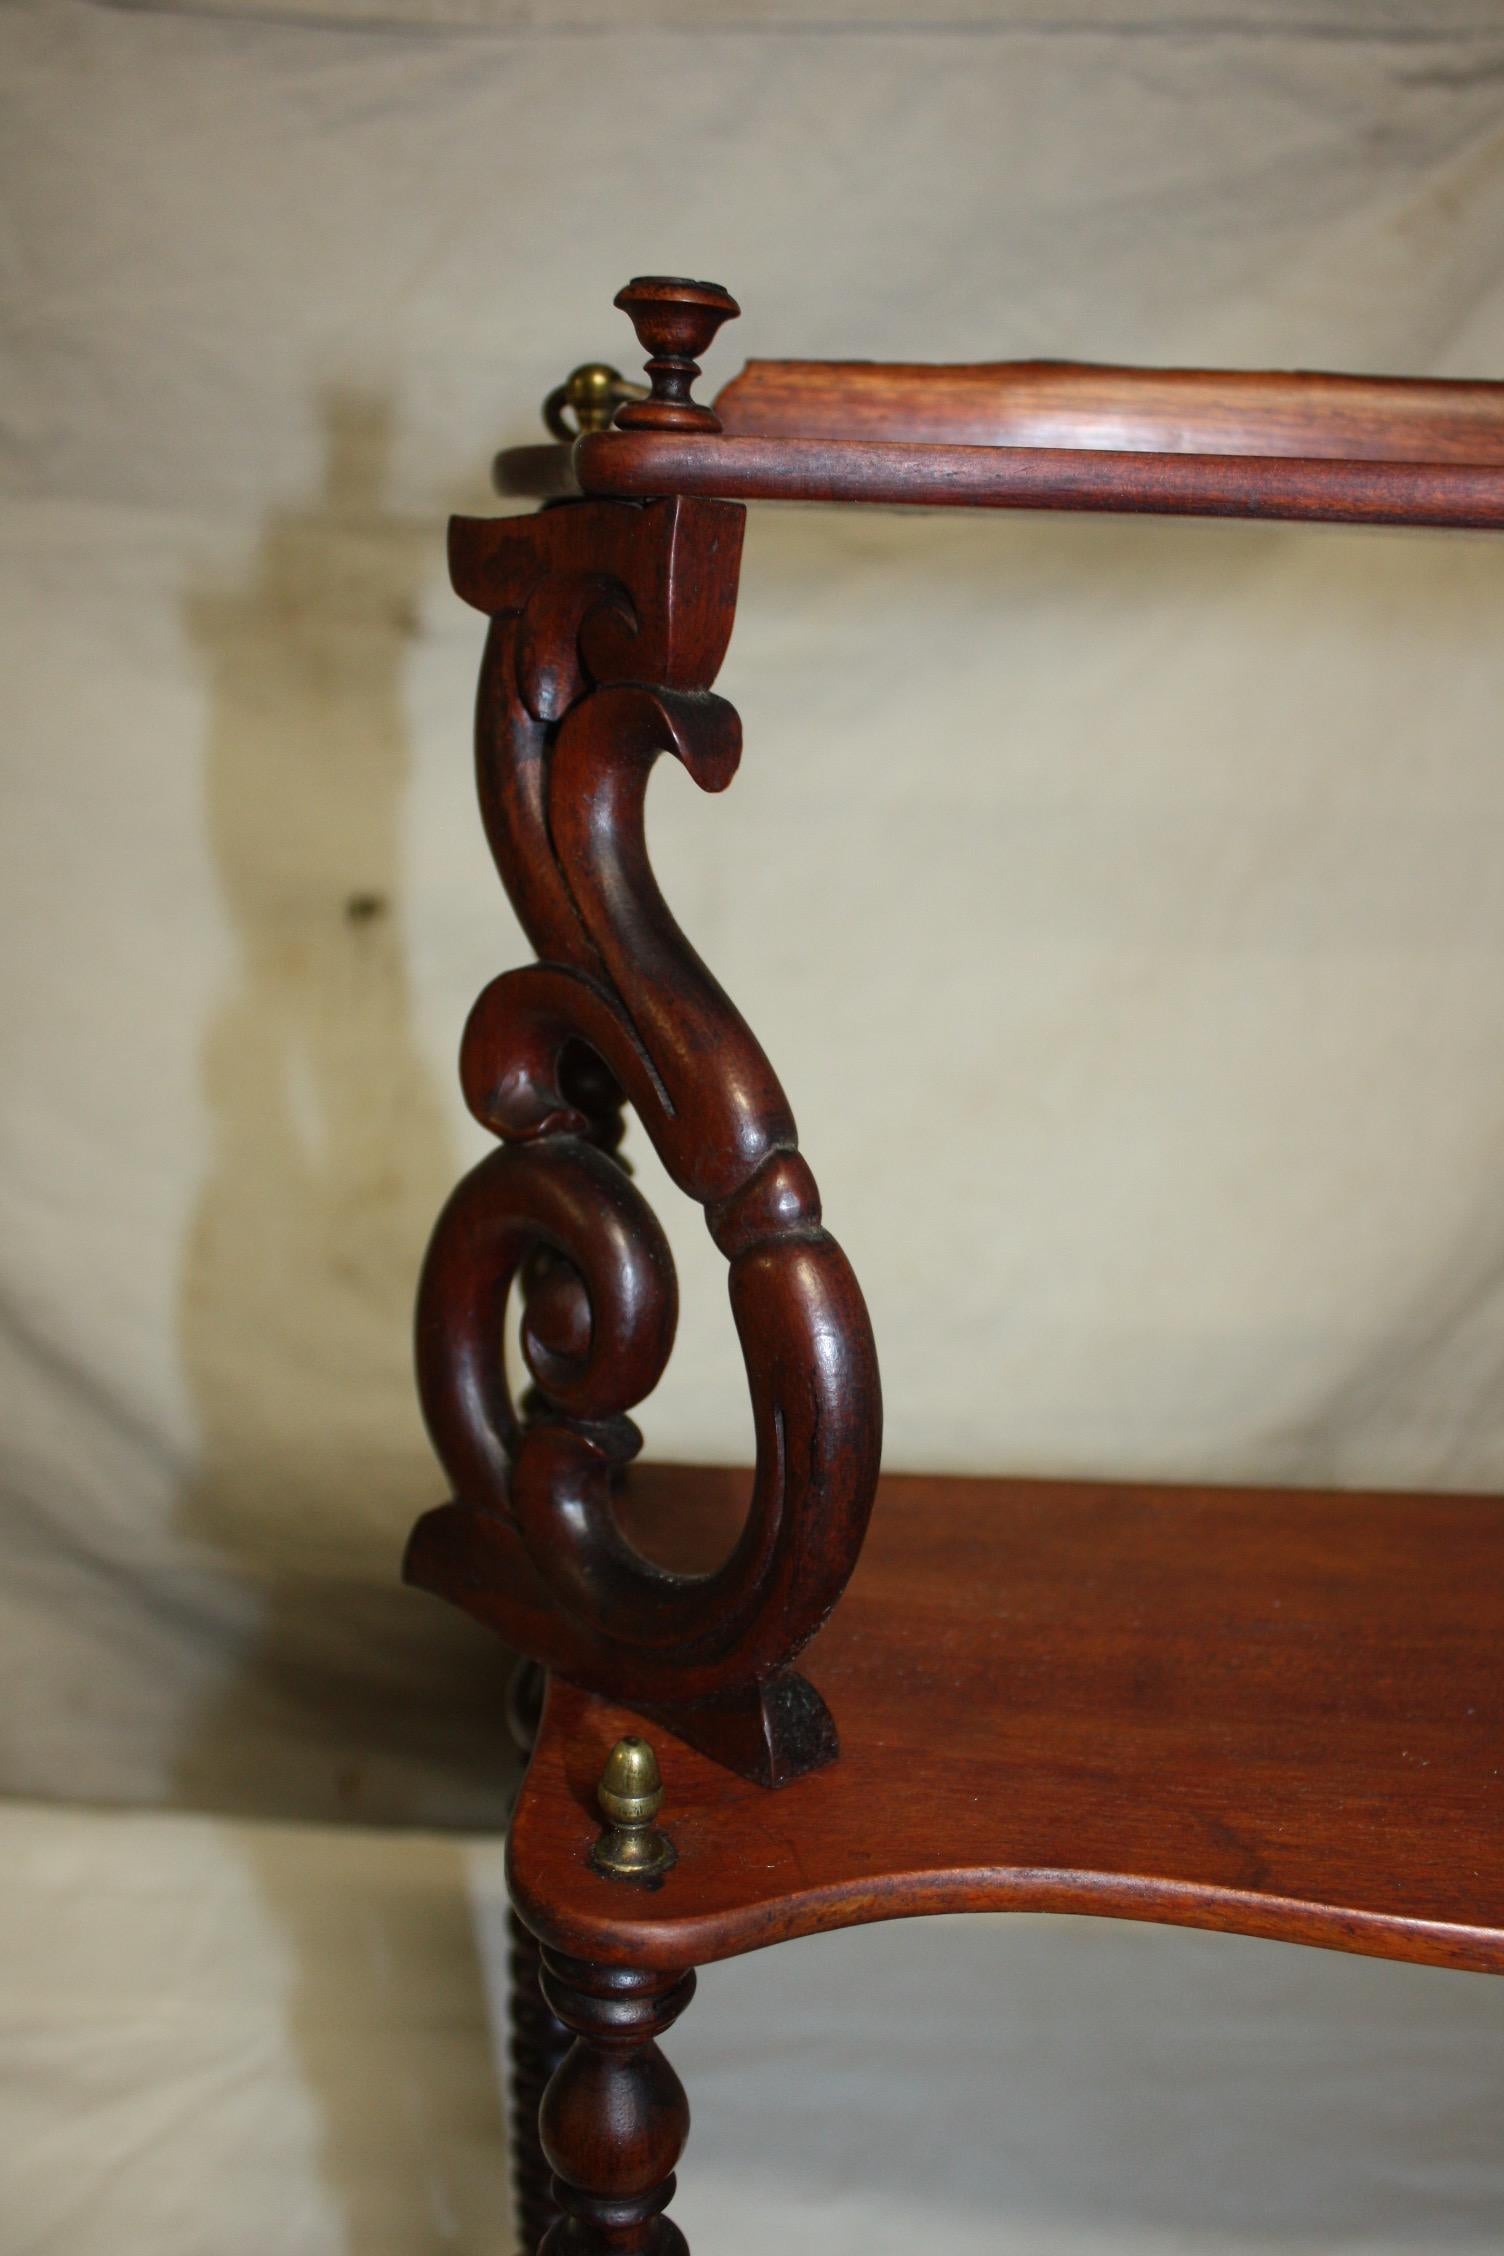 French 19th Century Wall Shelf In Good Condition For Sale In Stockbridge, GA